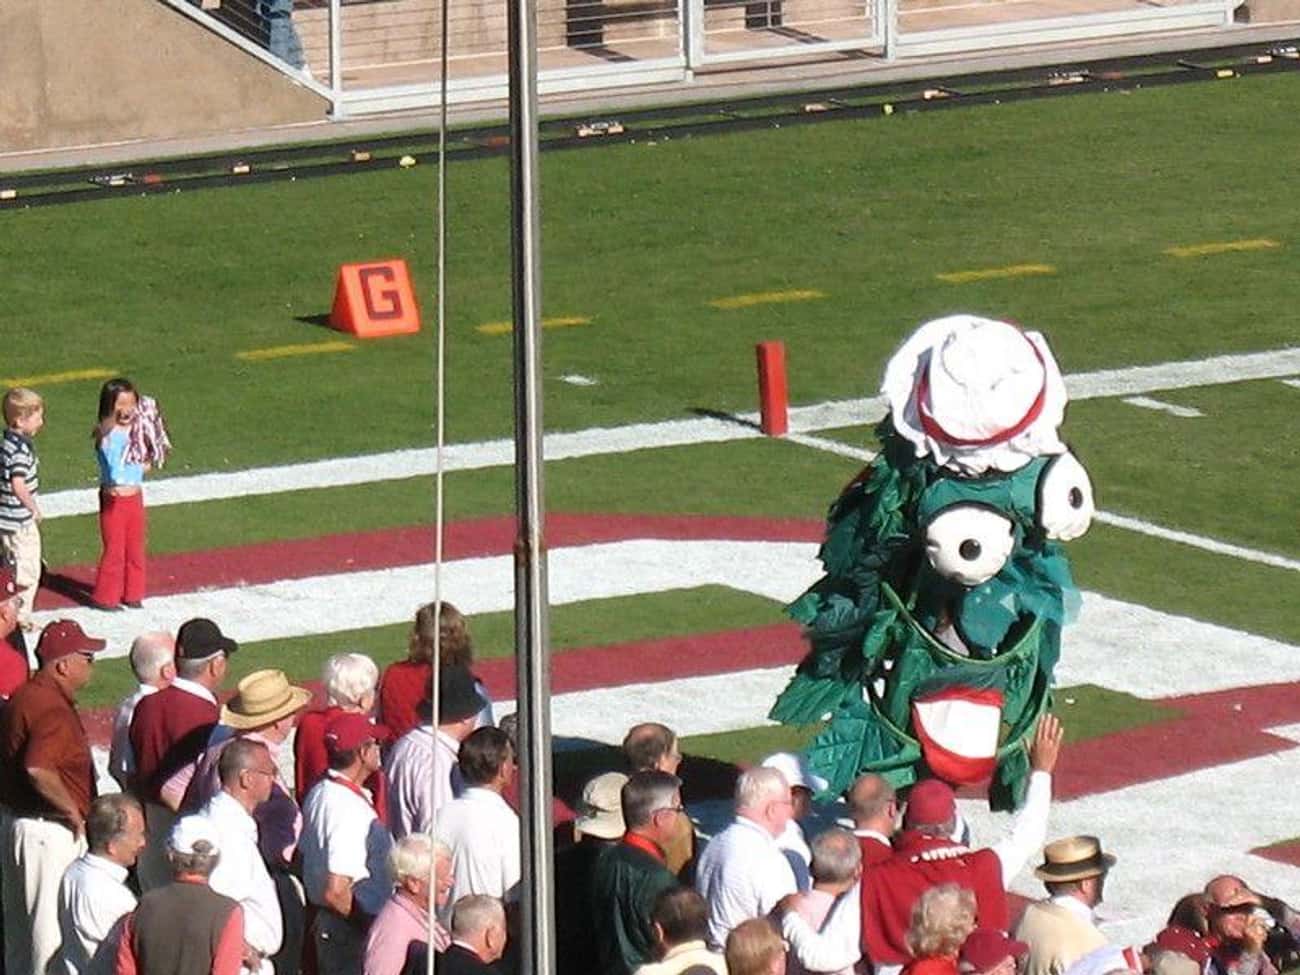 The Stanford Tree - Stanford University